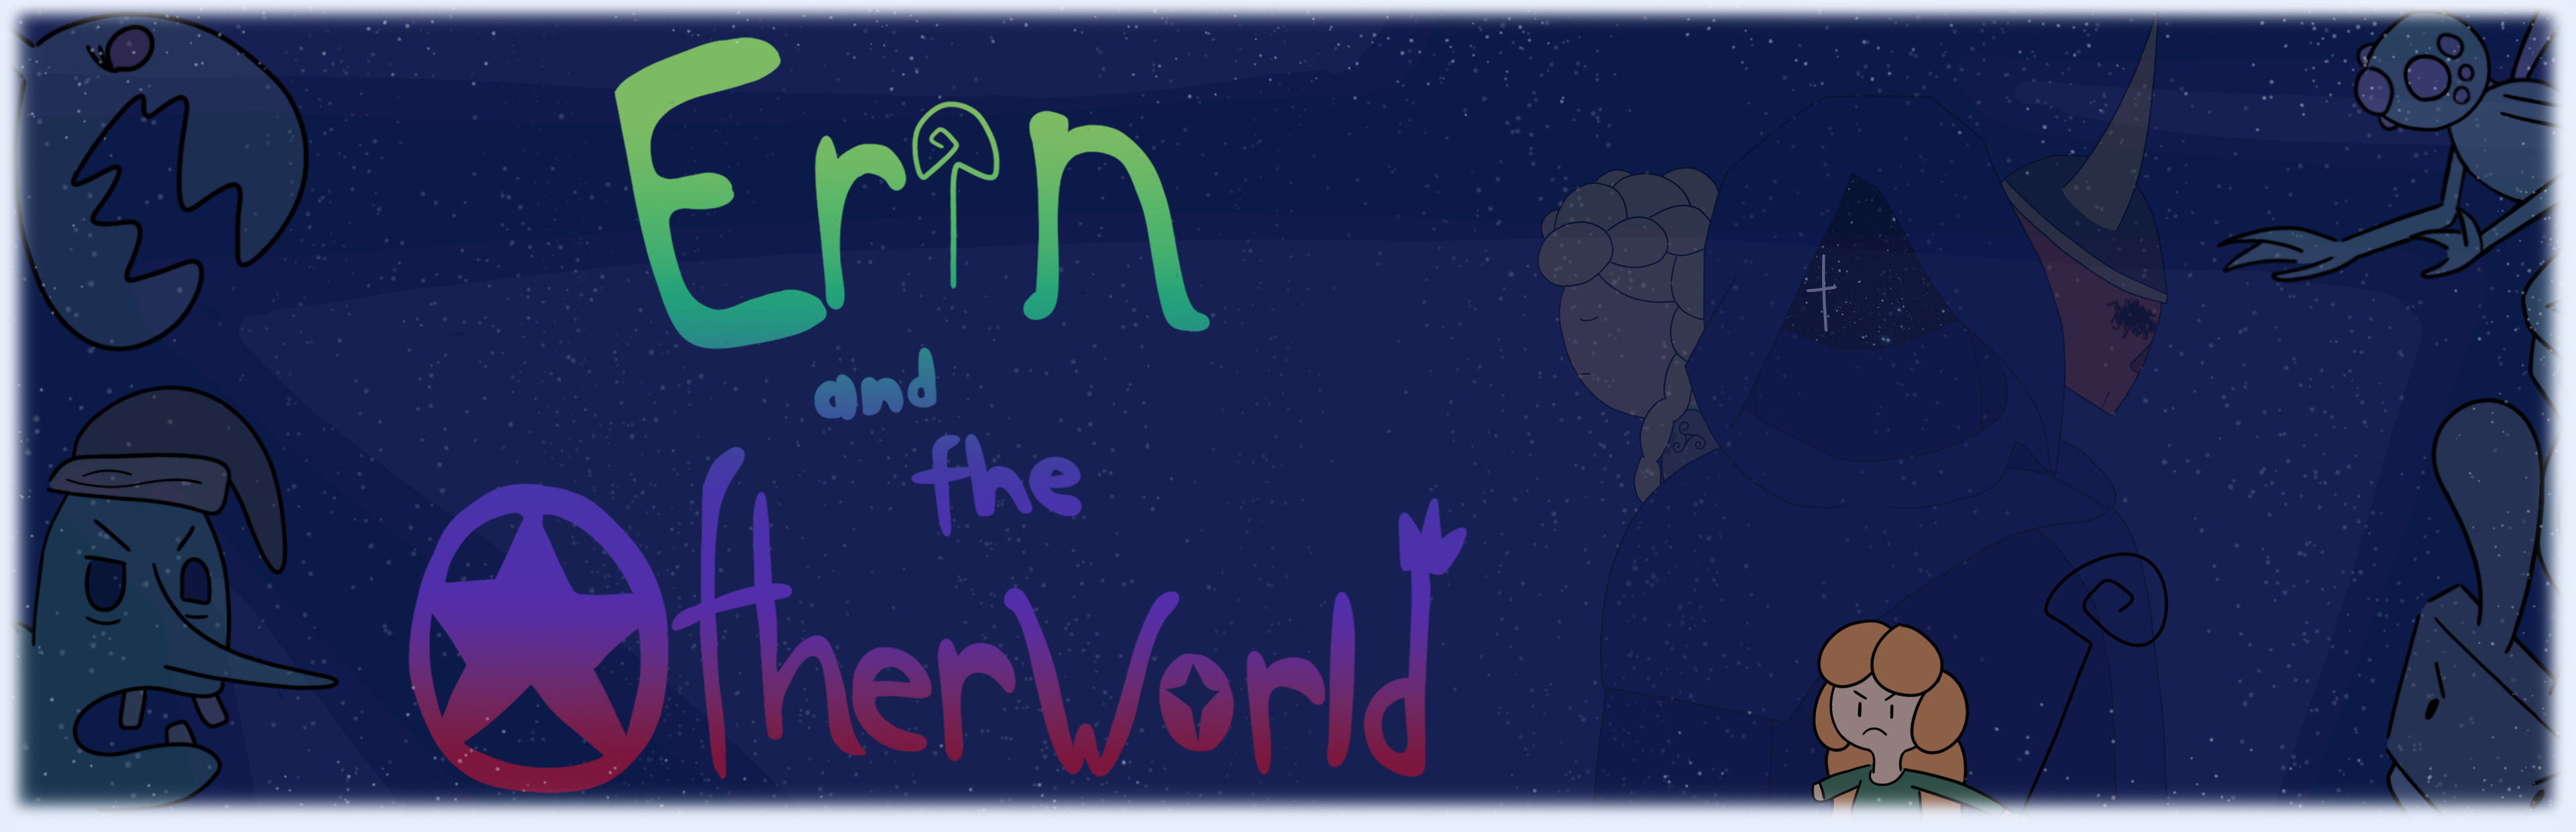 Erin and the Otherworld